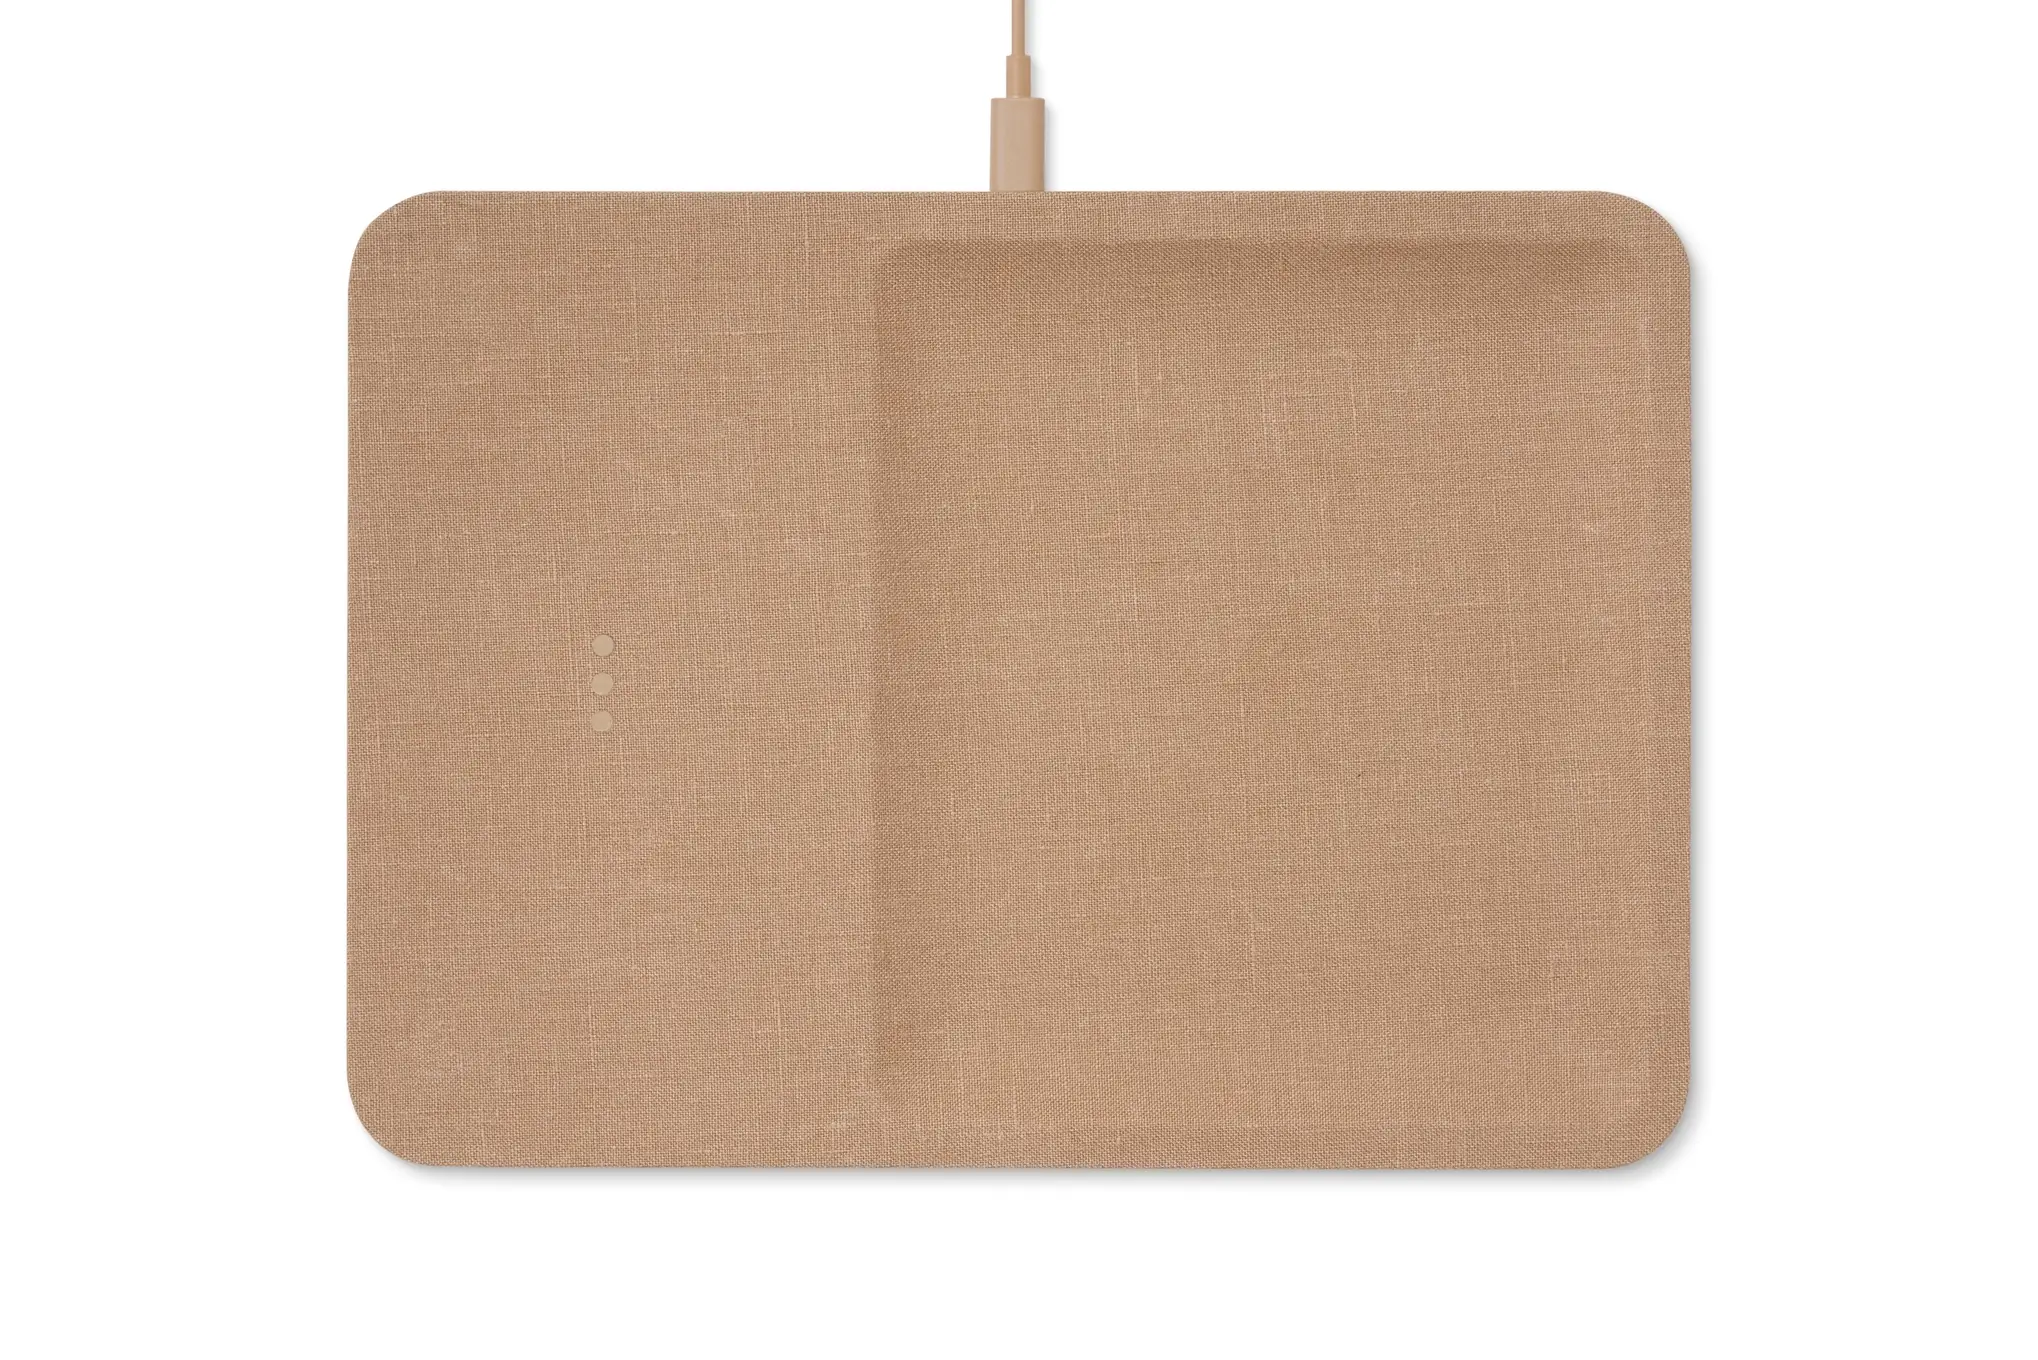 Courant Courant Catch:3 Linen Wireless Charge Valet Tray Camel